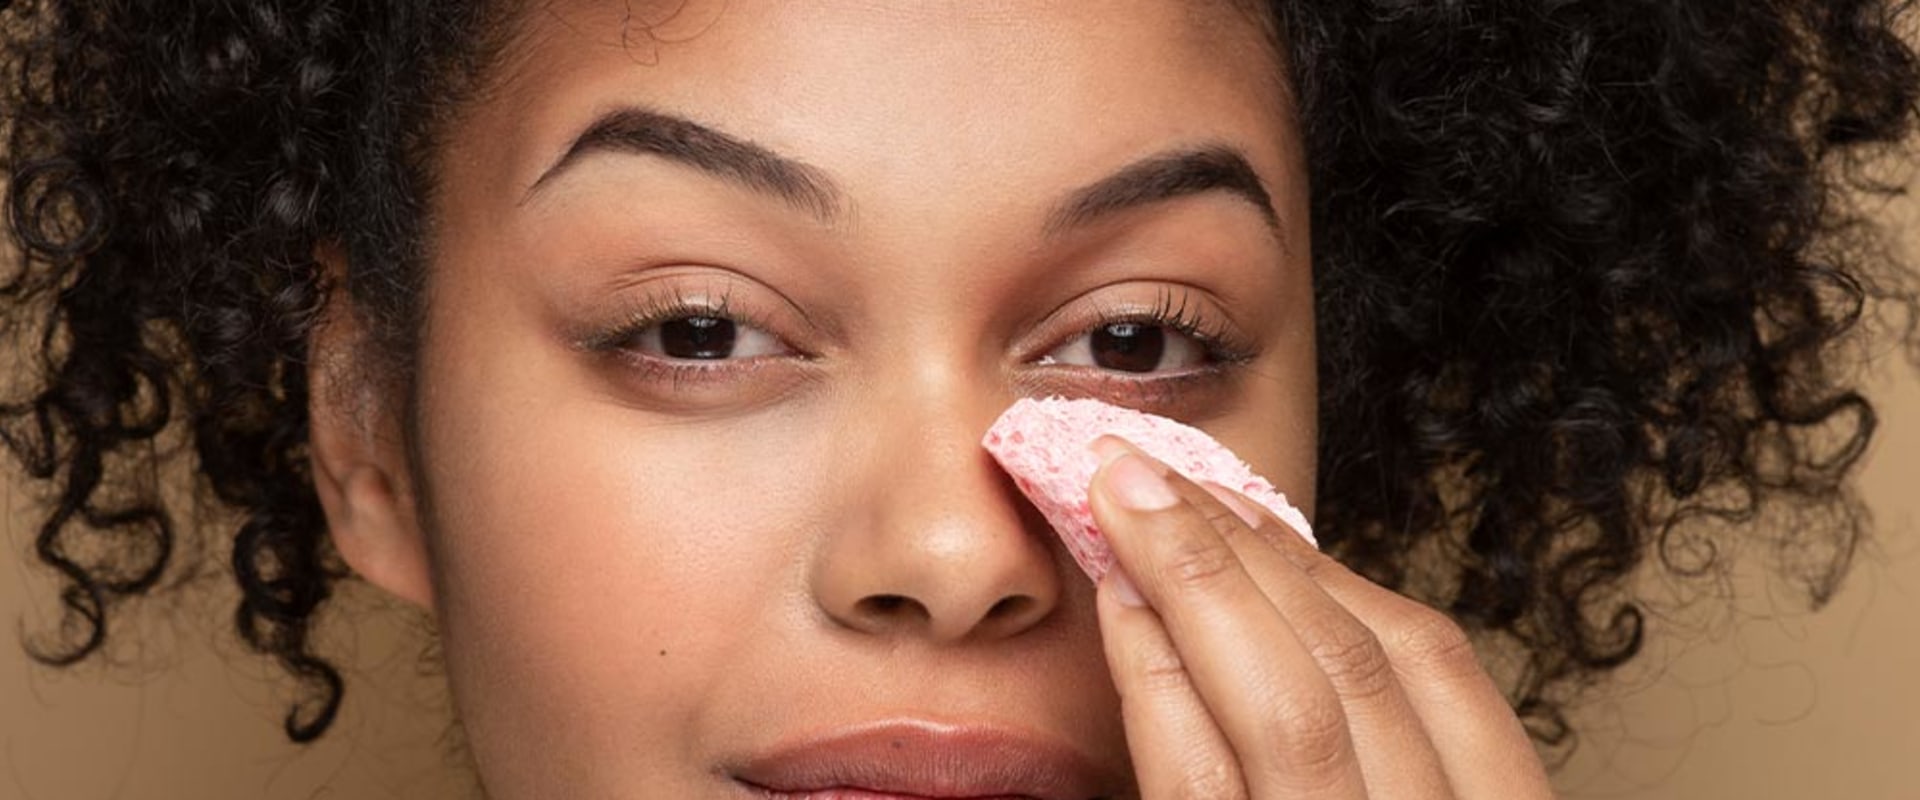 Does skincare make your skin glow?